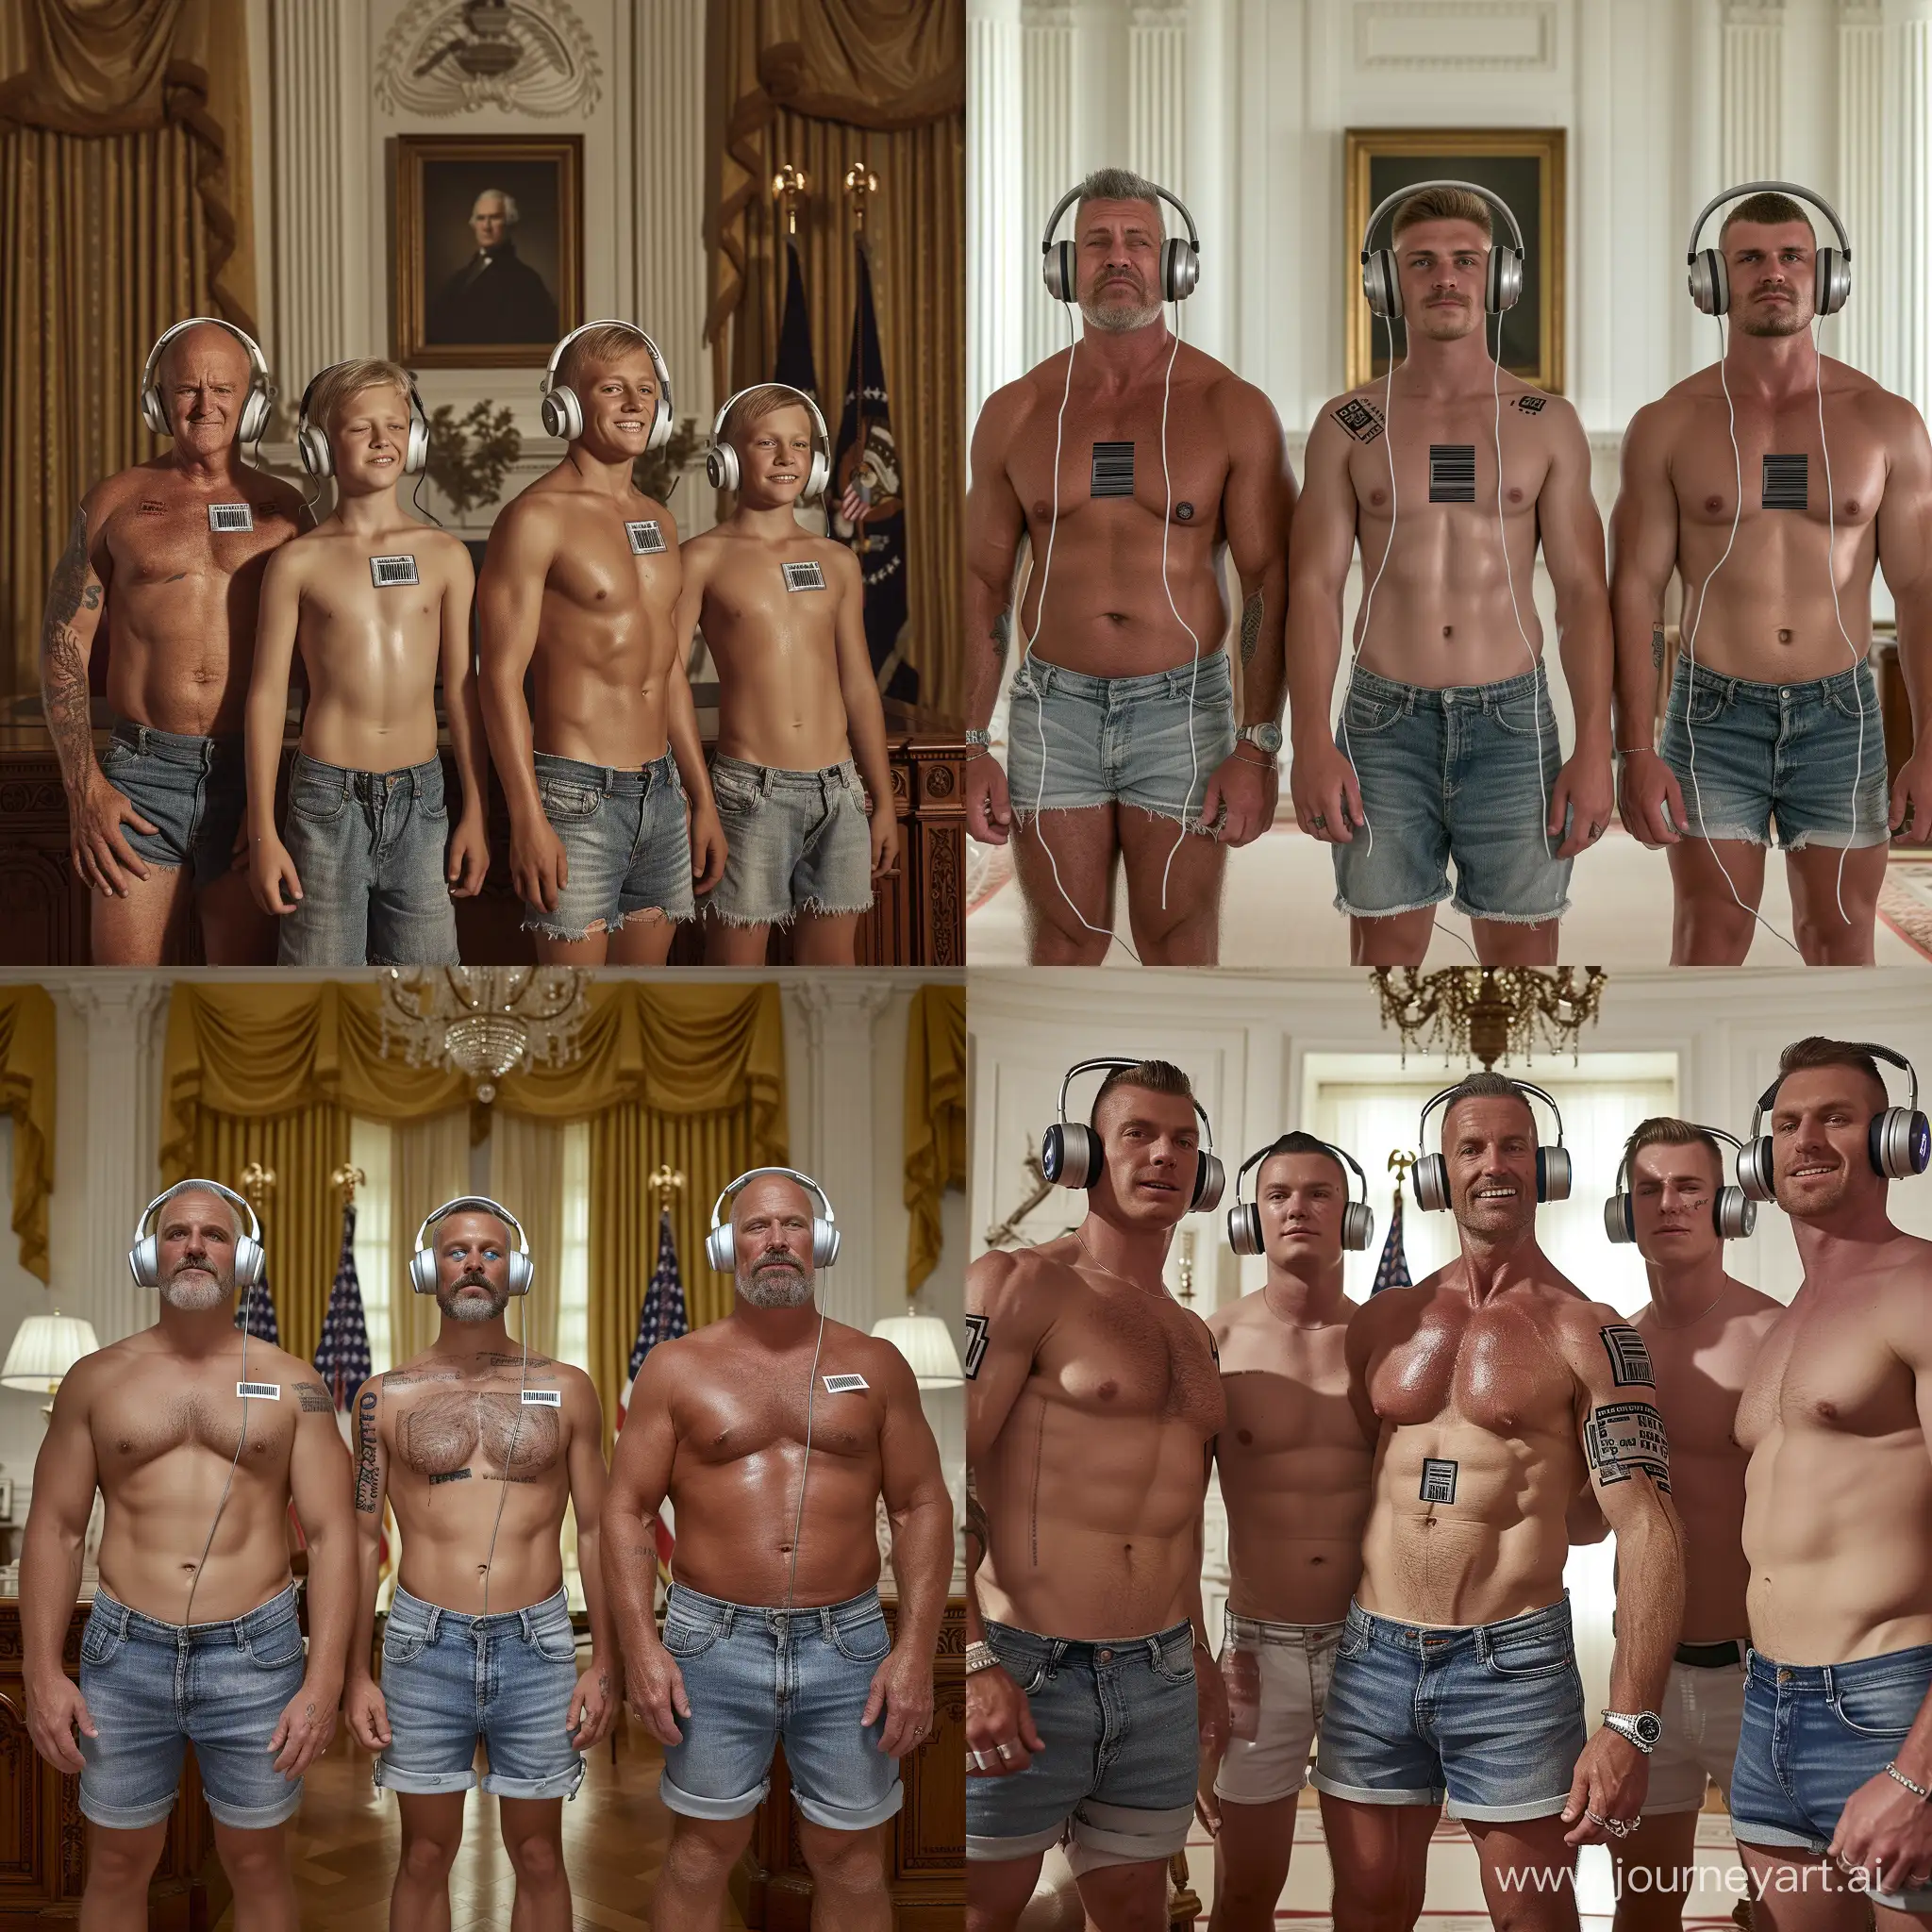 Muscular-Men-in-Mass-Indoctrination-at-White-House-Oval-Office